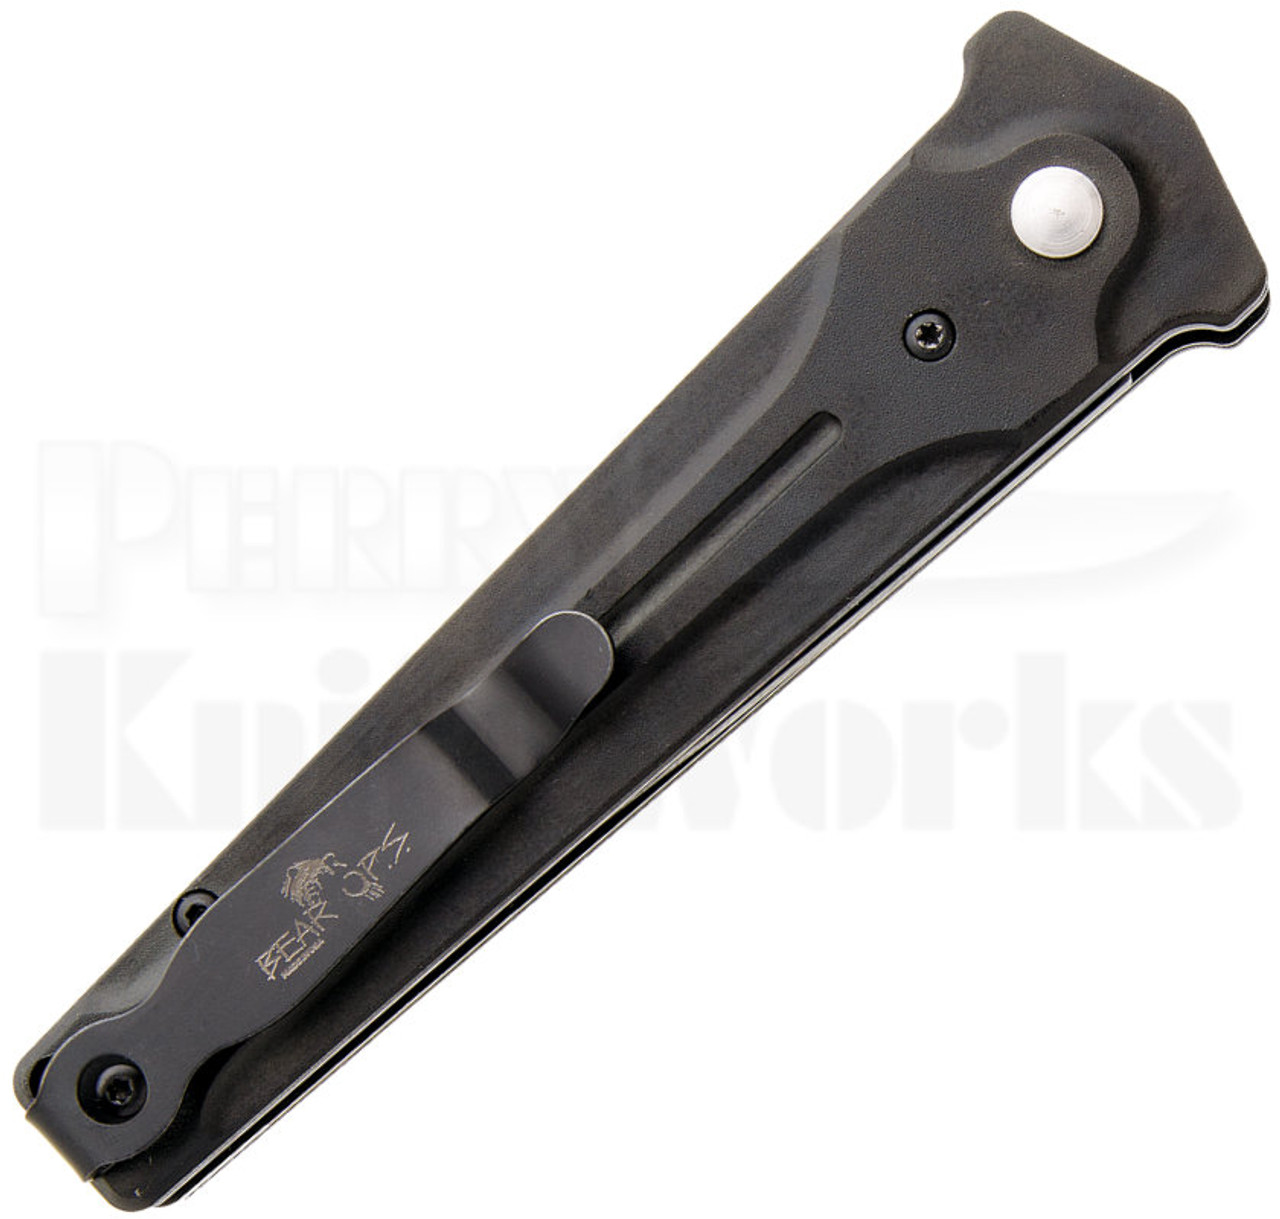 Bear OPS Bold Action lll Small Automatic Knife l 3.50" Black Blade 